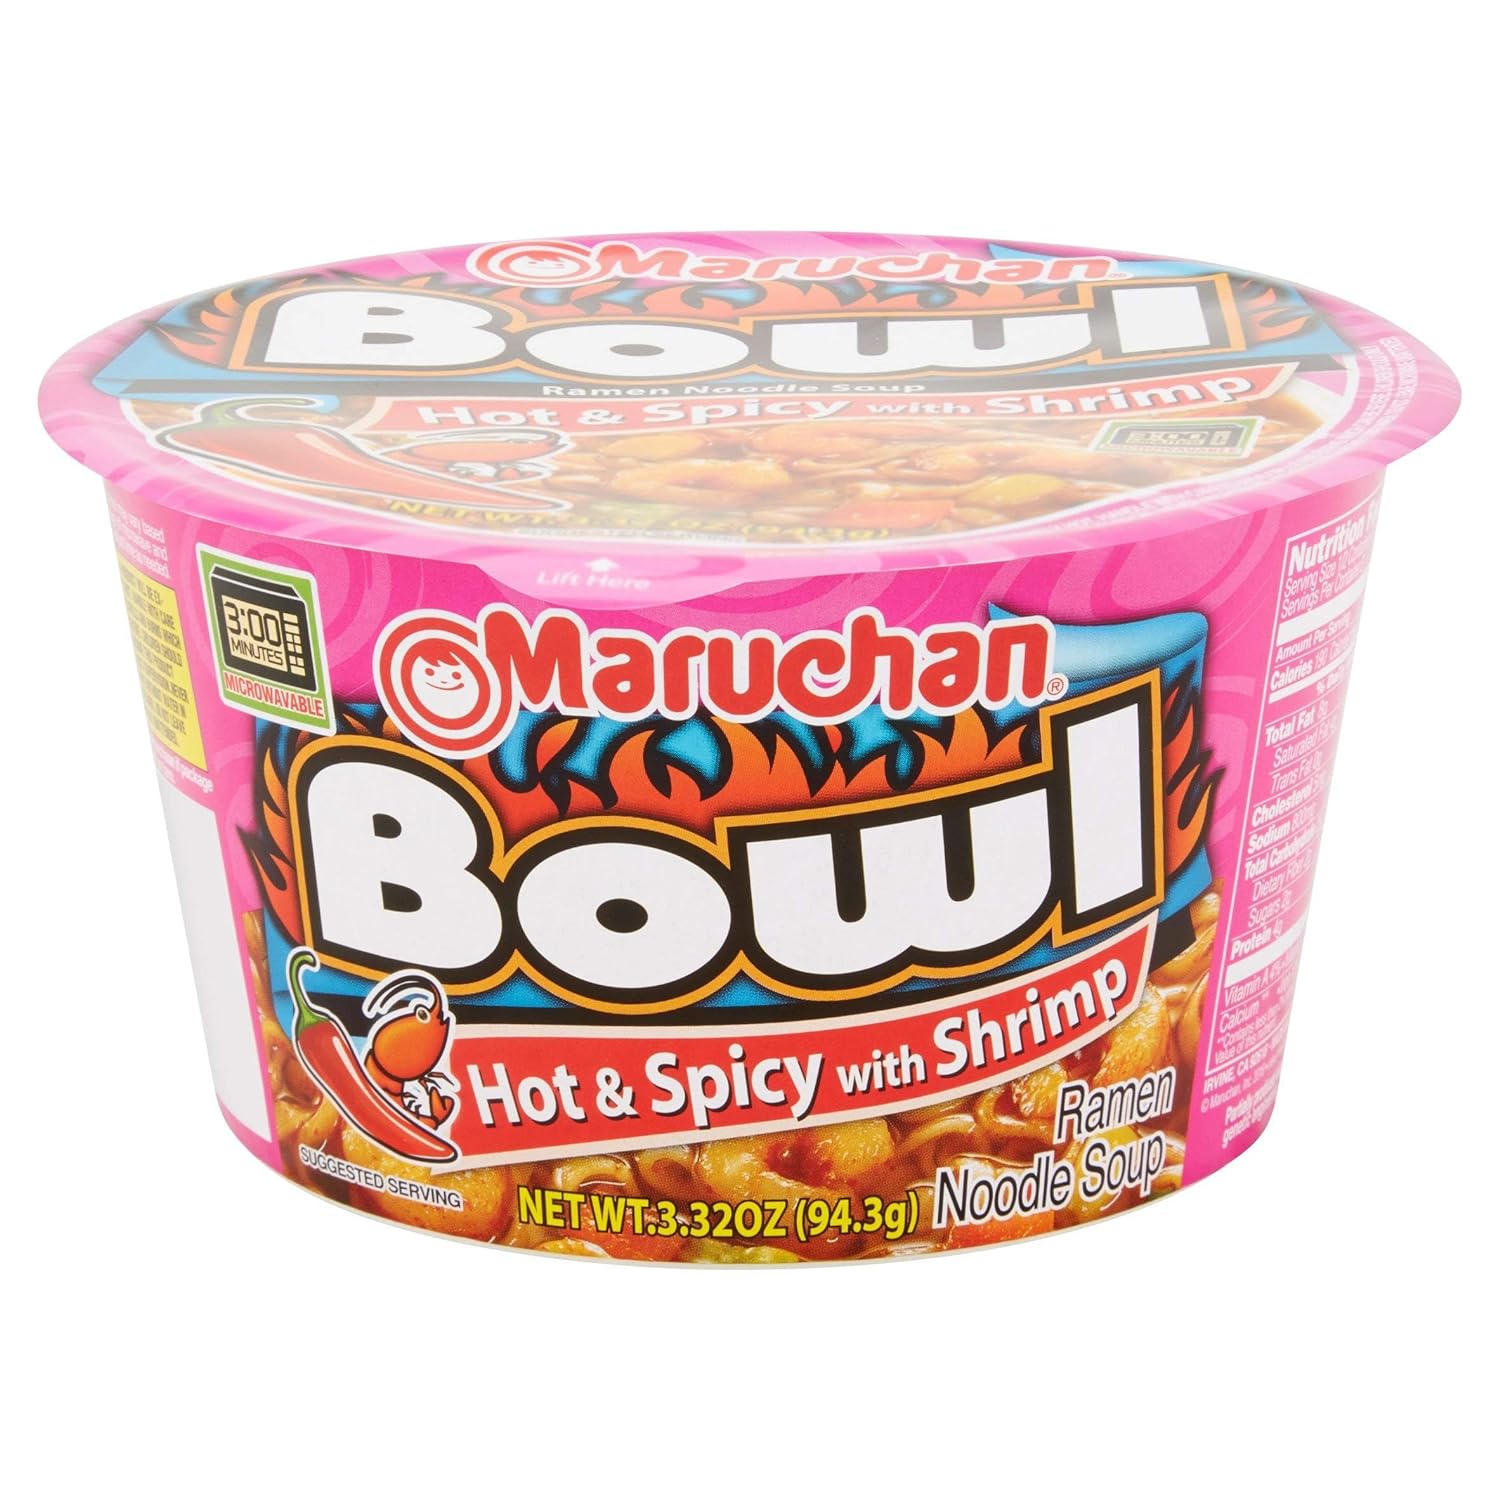 Maruchan Bowl Hot & Spicy with Shrimp Flavor Ramen Noodles with Vegetables, 3.3 OZ (2 Pack) : Grocery & Gourmet Food